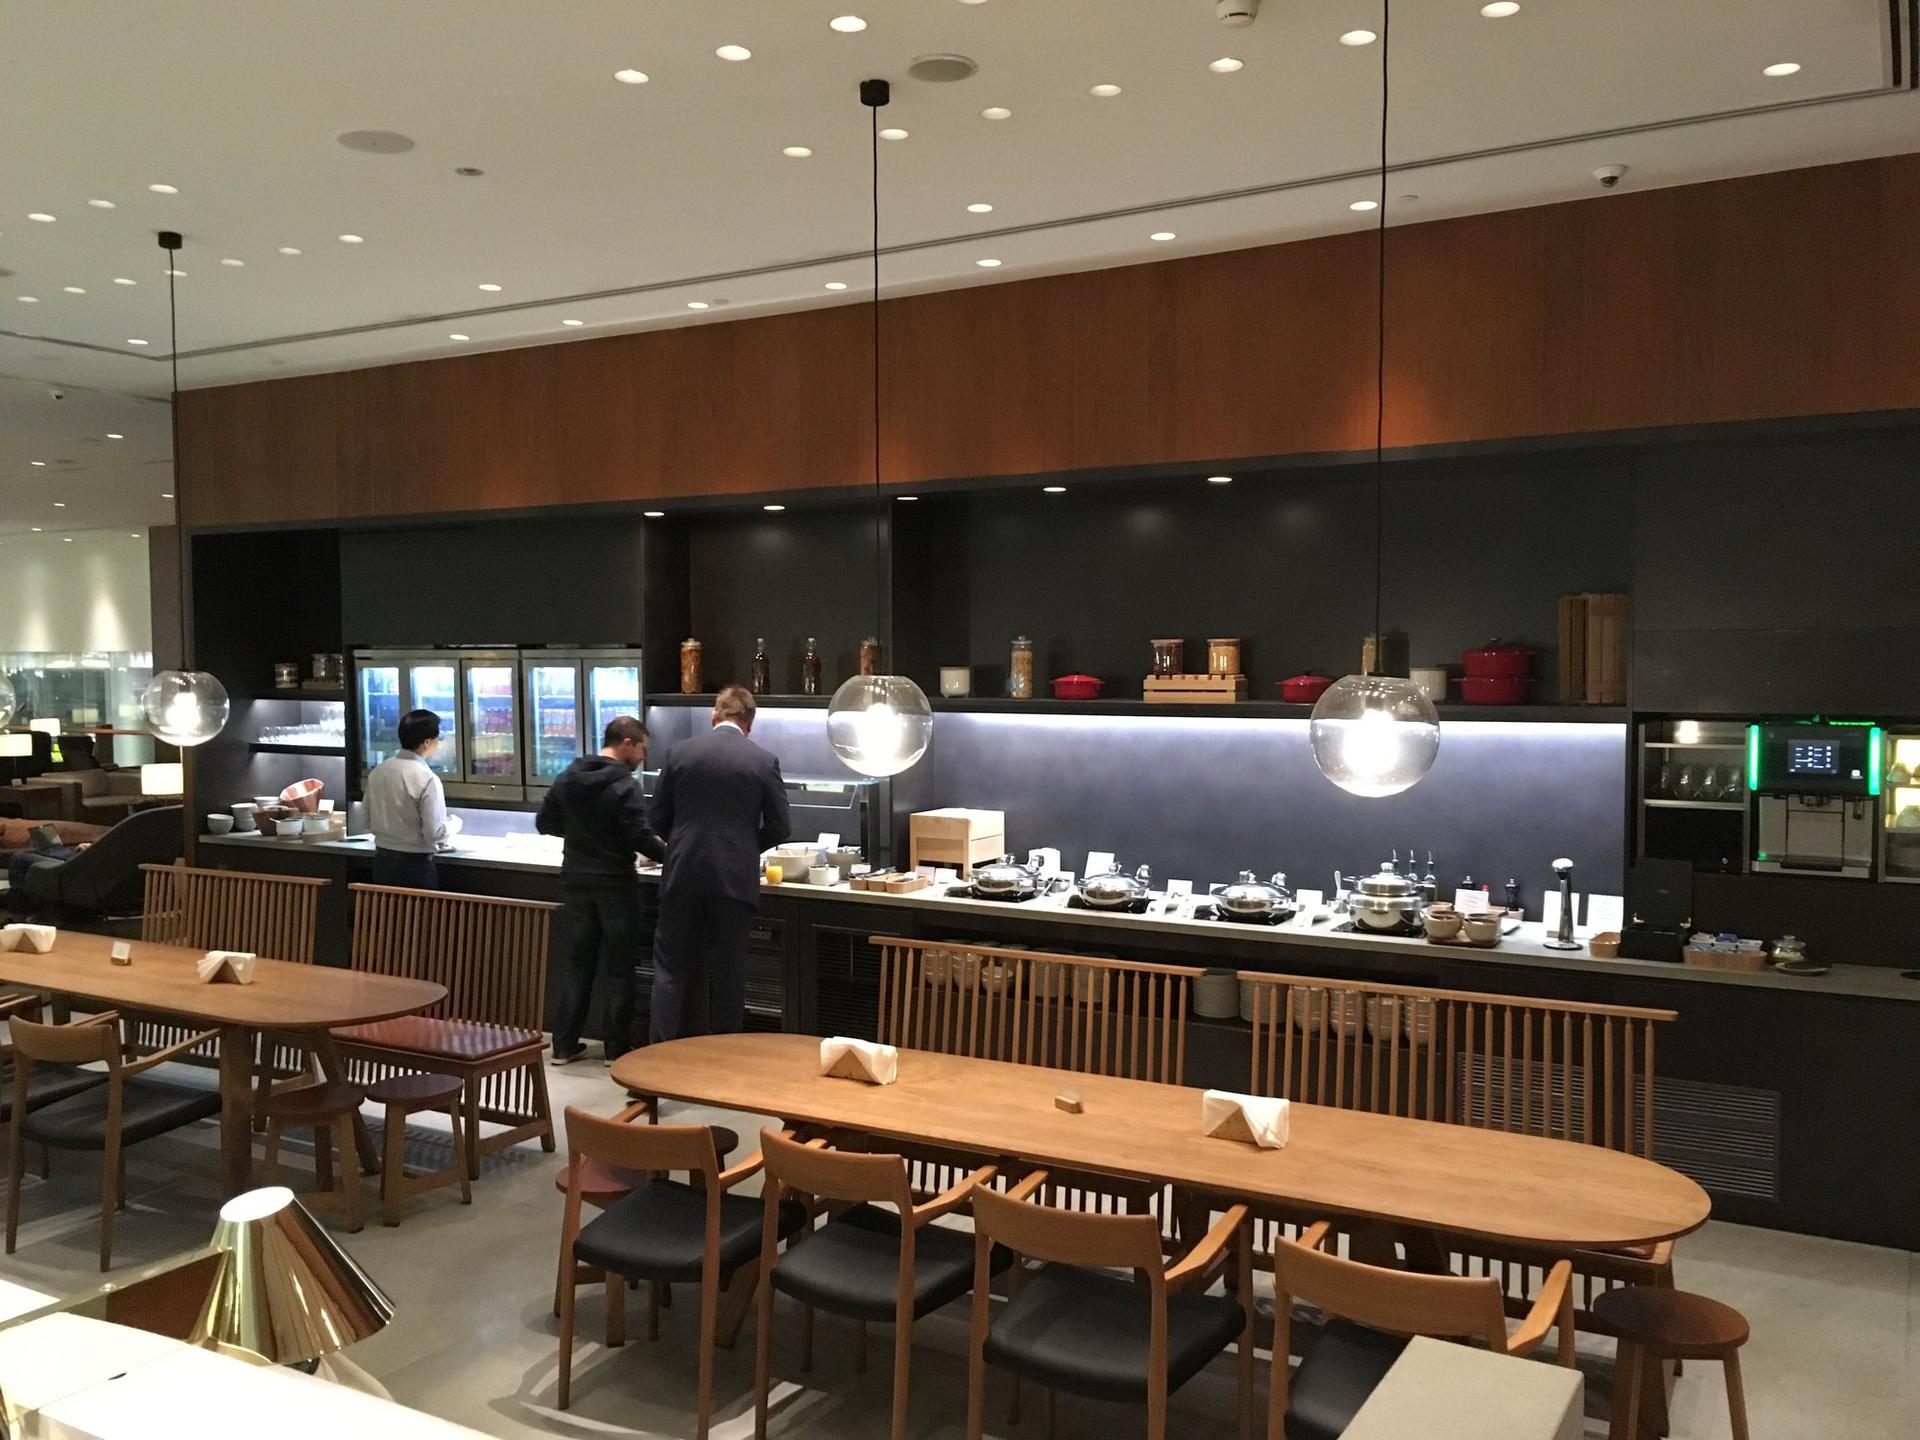 Cathay Pacific Lounge image 27 of 60